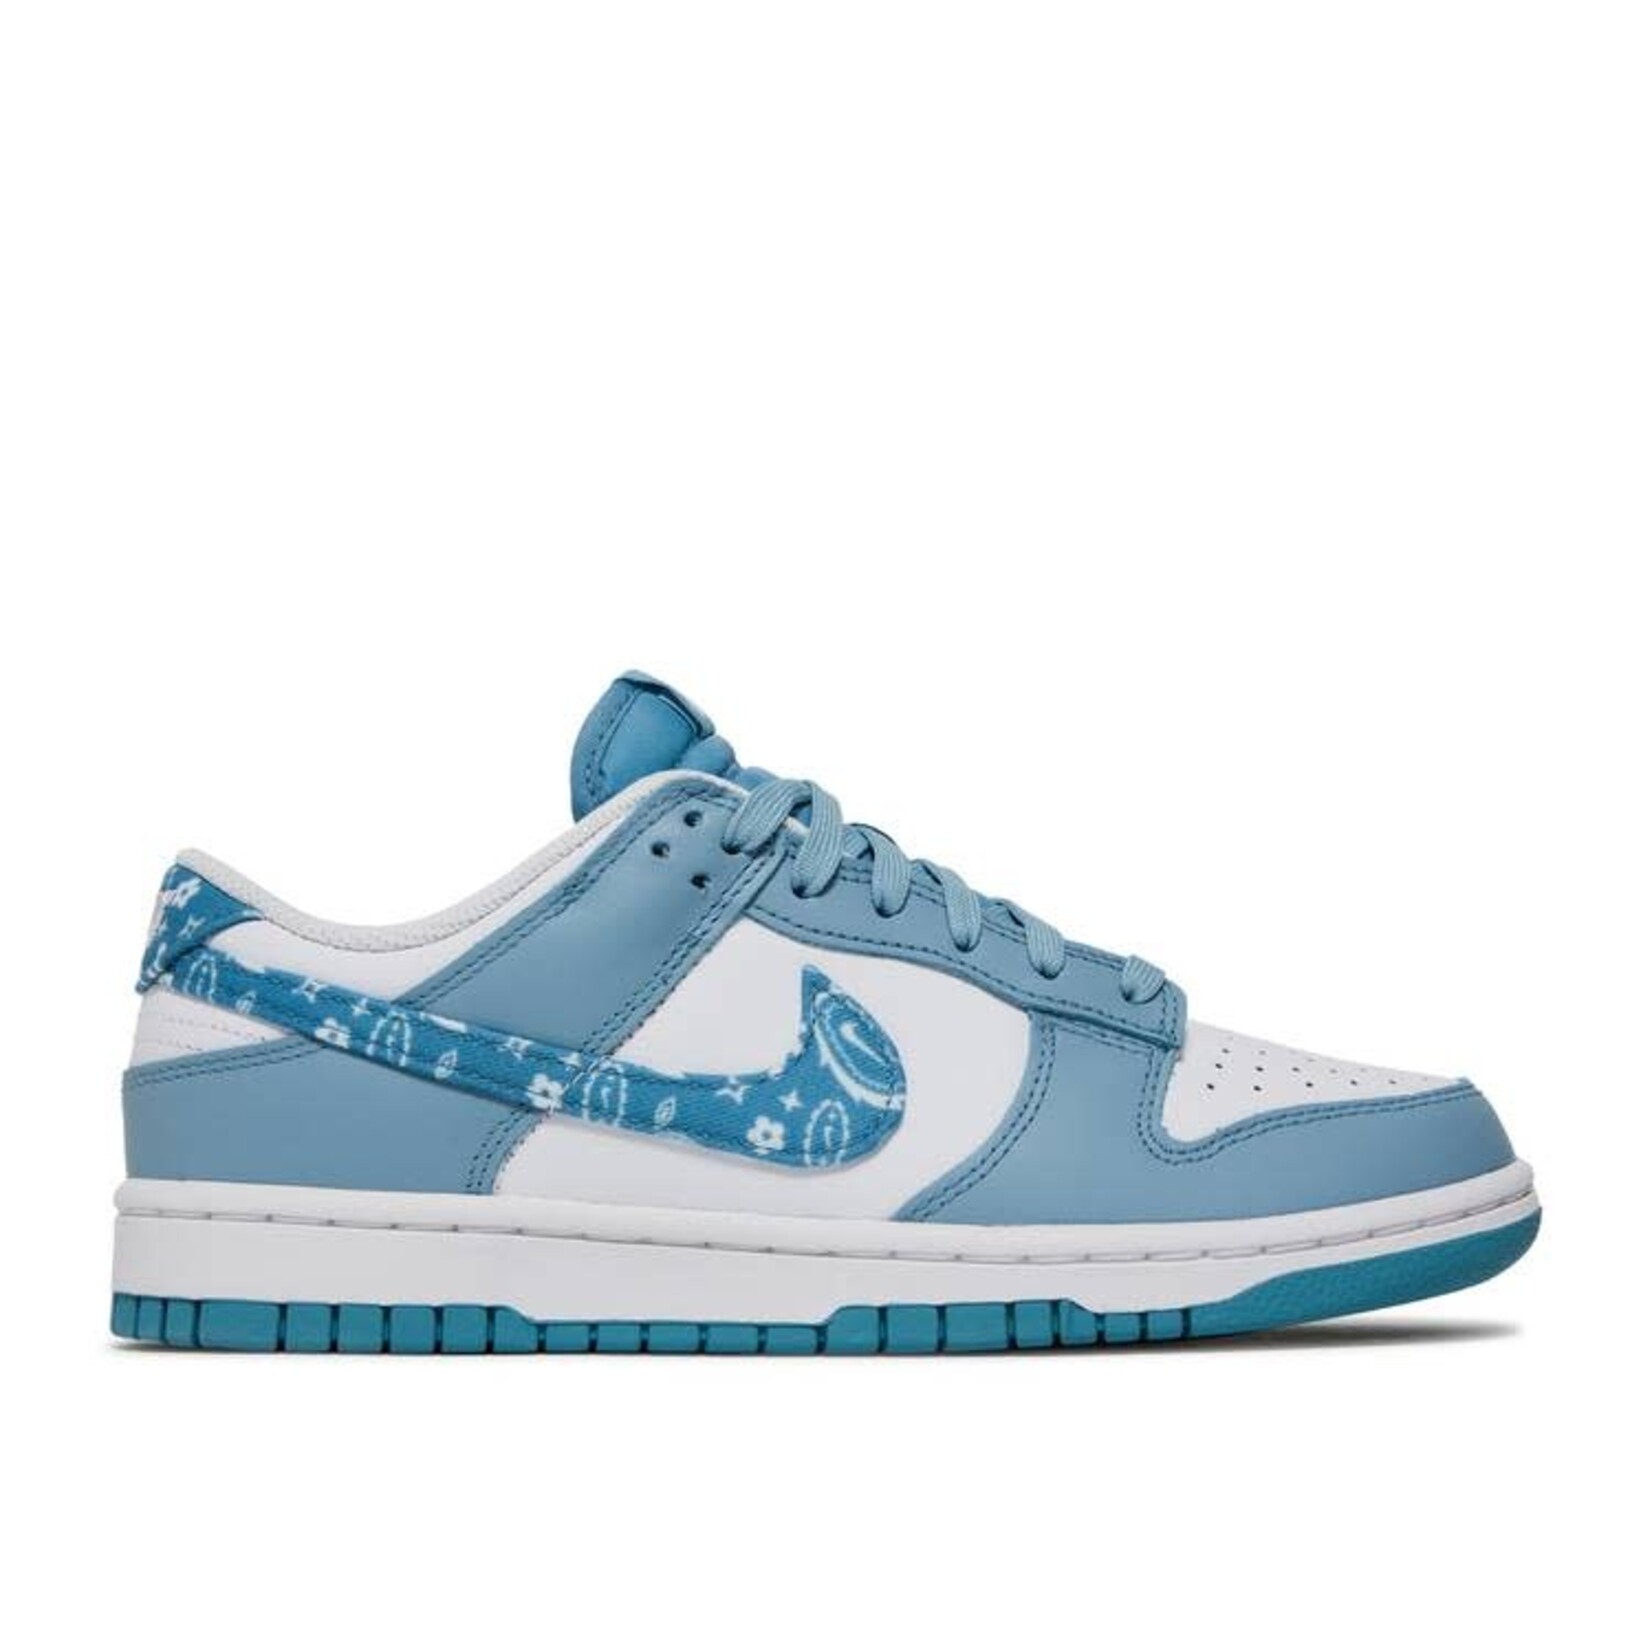 Nike Nike Dunk Low Essential Paisley Pack Worn Blue (Women's) Size 7W, DS BRAND NEW